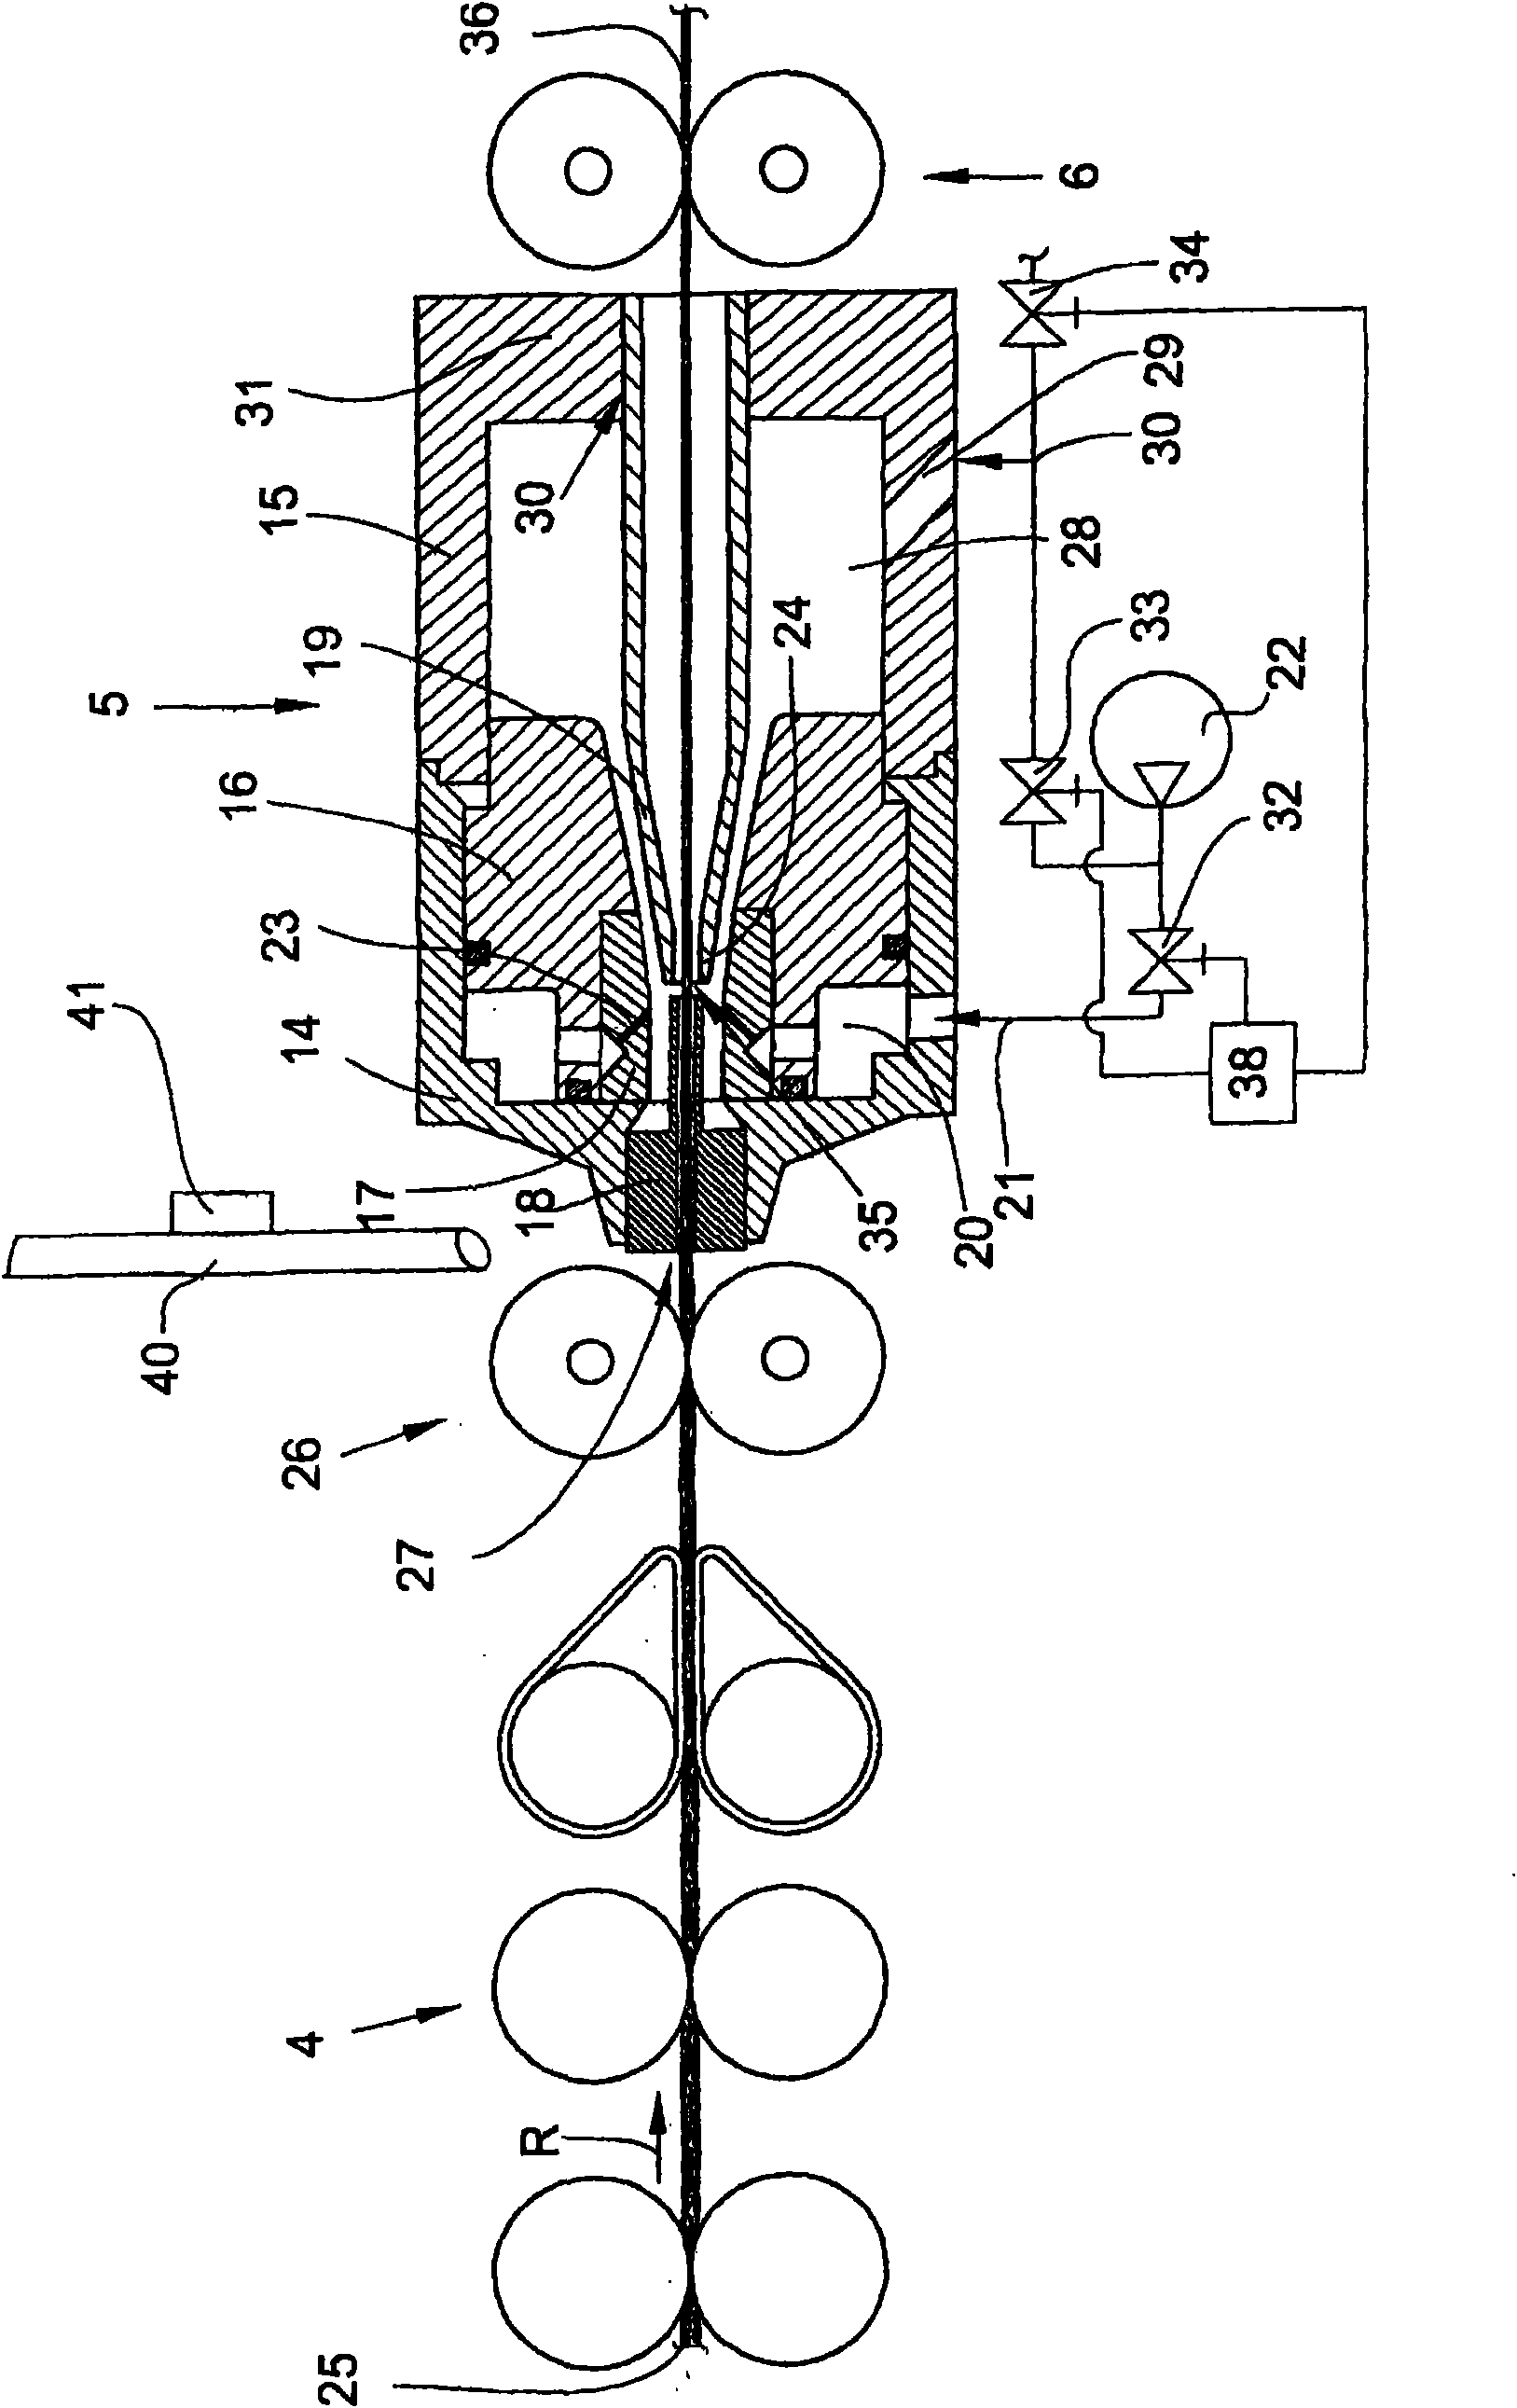 Air nozzle assembly having a joining apparatus